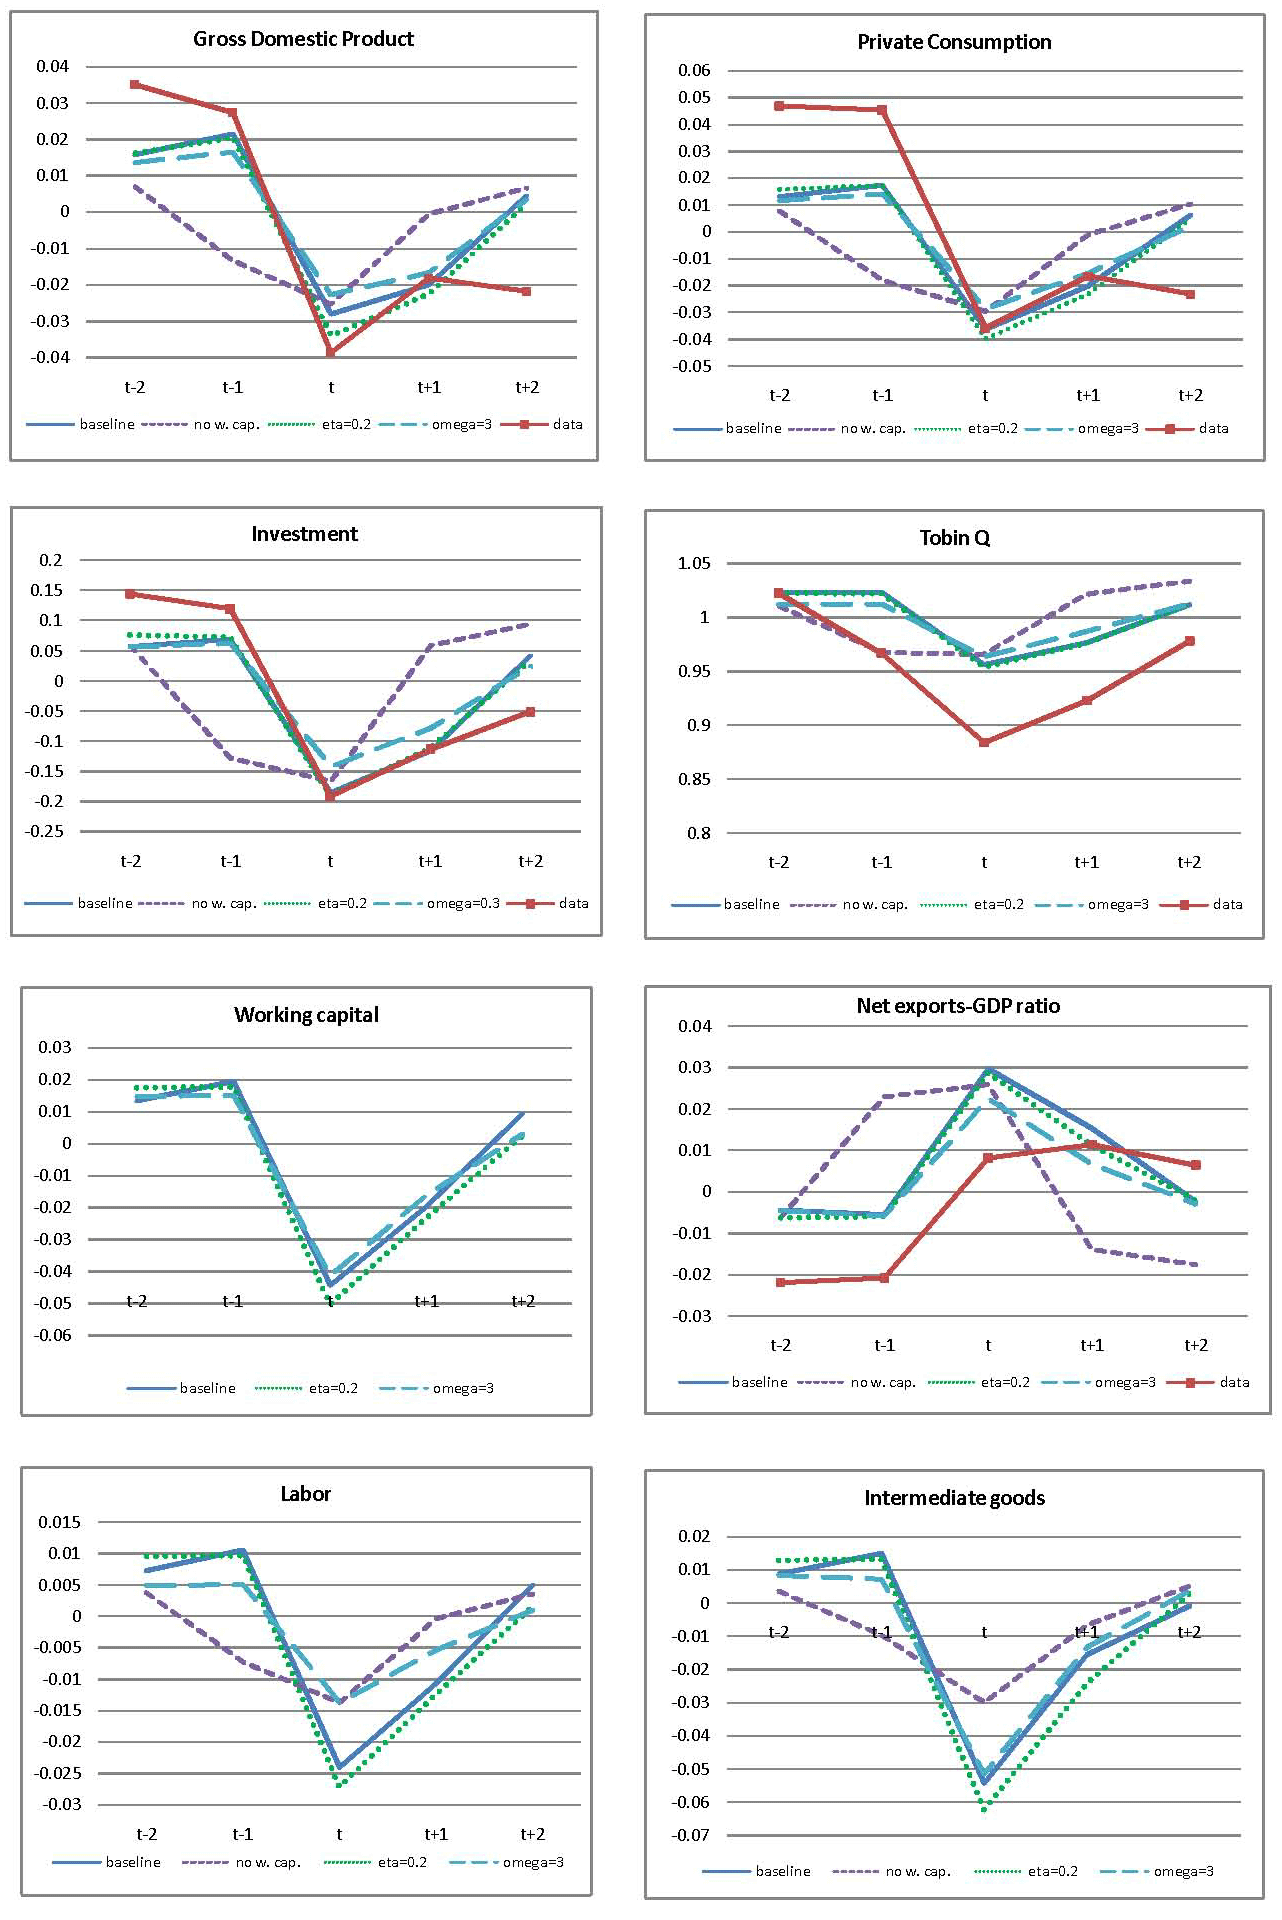 Figure 4 shows the results of the sensitivity analysis of Sudden Stop events in model simulations with alternative parameter variations. The figure shows eight panels, each one plotting data lines for five-year event windows based on medians of deviations from HP filtered trends. The horizontal axis of each panel shows dates from t-2 to t+2 with date t corresponding to the date of the Sudden Stop events. The vertical axis of each panel shows the percent deviation from trend of the corresponding variable. Each panel plots four lines. The first line shows the baseline model simulation, the second is for the case without working capital, the third is for the scenario with eta=0.2, the fourth is for the case with omega=3, and the fifth line traces the actual data events. The Figure is divided in two columns, each with four panels. In the left column, the top panel shows gross domestic product, the second panel from the top shows investment, the third shows working capital and the bottom panel shows labor. In the right column, the top panel shows private consumption, the second panel from the top shows the Tobin Q, the third shows the net exports-output ratio, and the bottom panel shows intermediate goods.